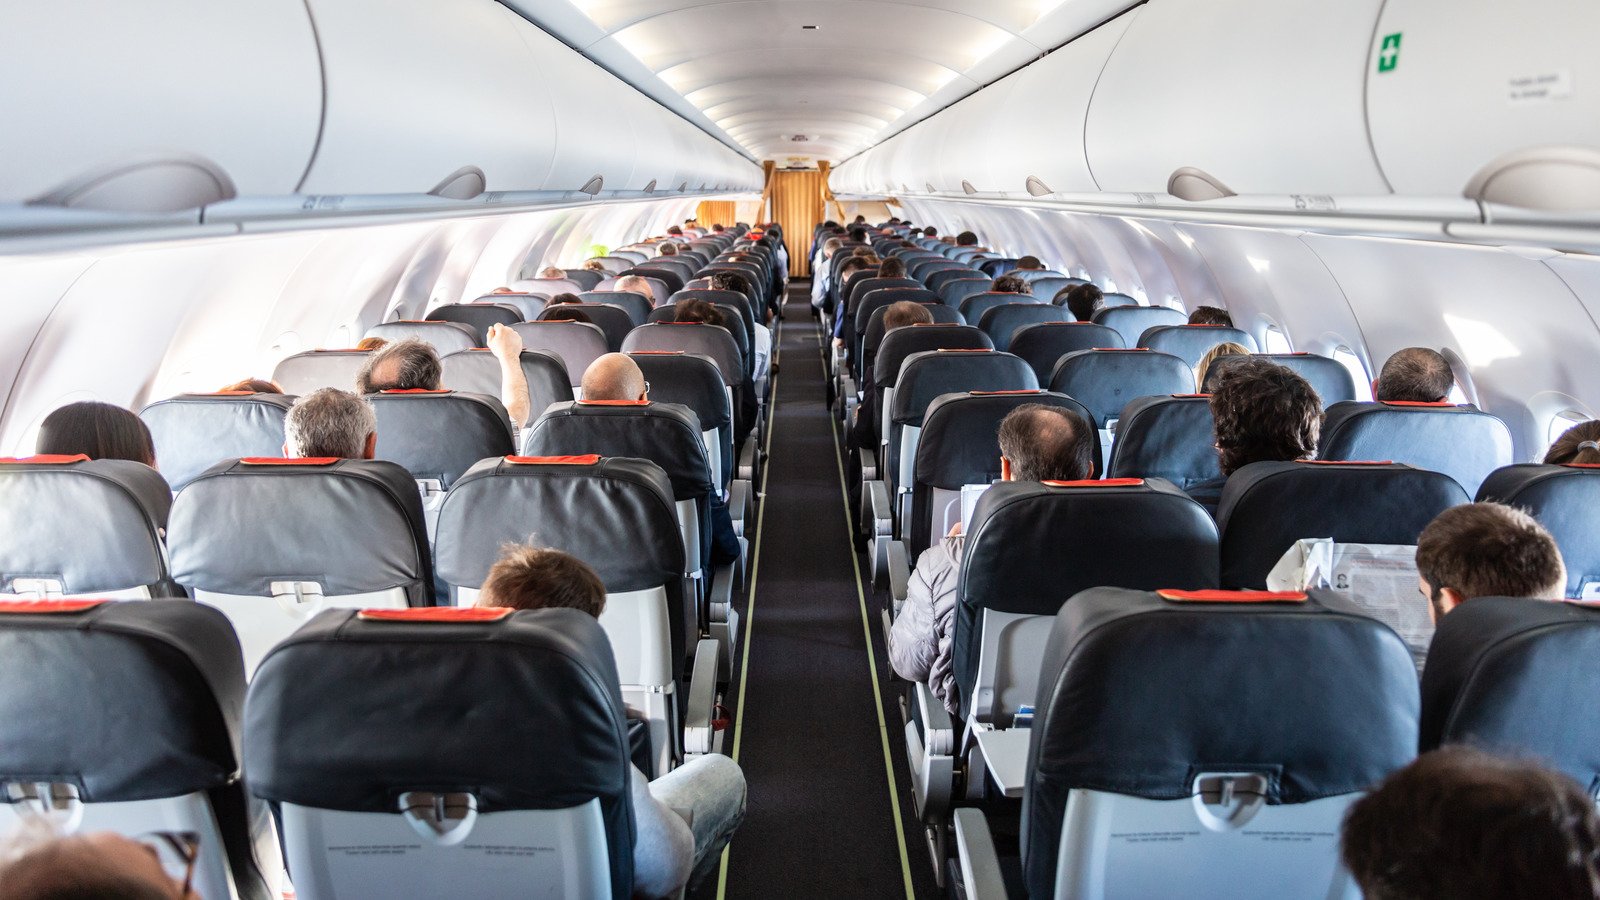 The Best Place To Sit On A Plane If You Want To Stay Healthy - Health Digest